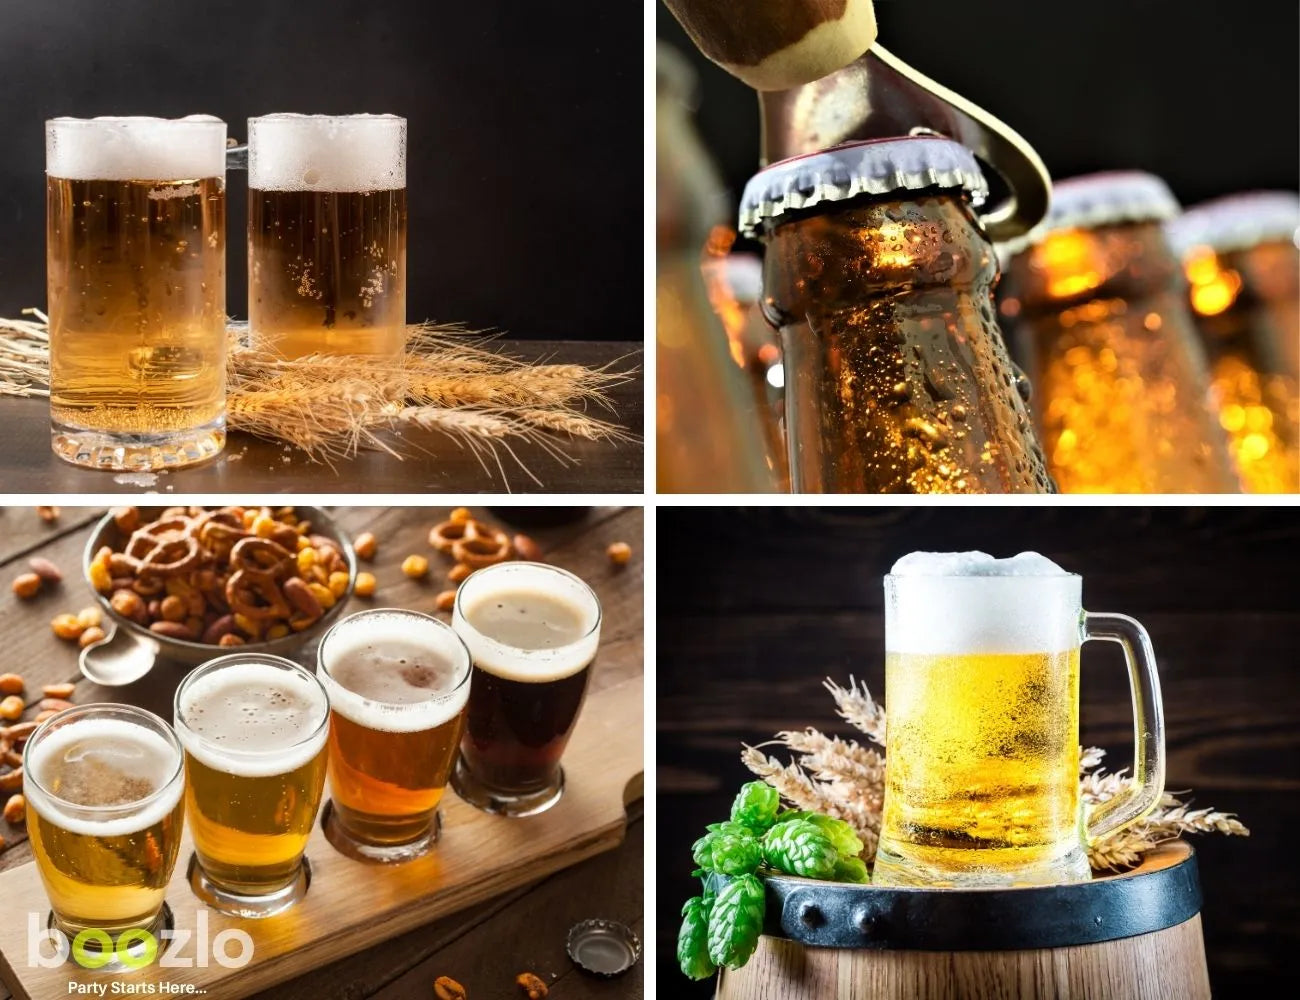 xploring the Favorites and Emerging Trends of Beers